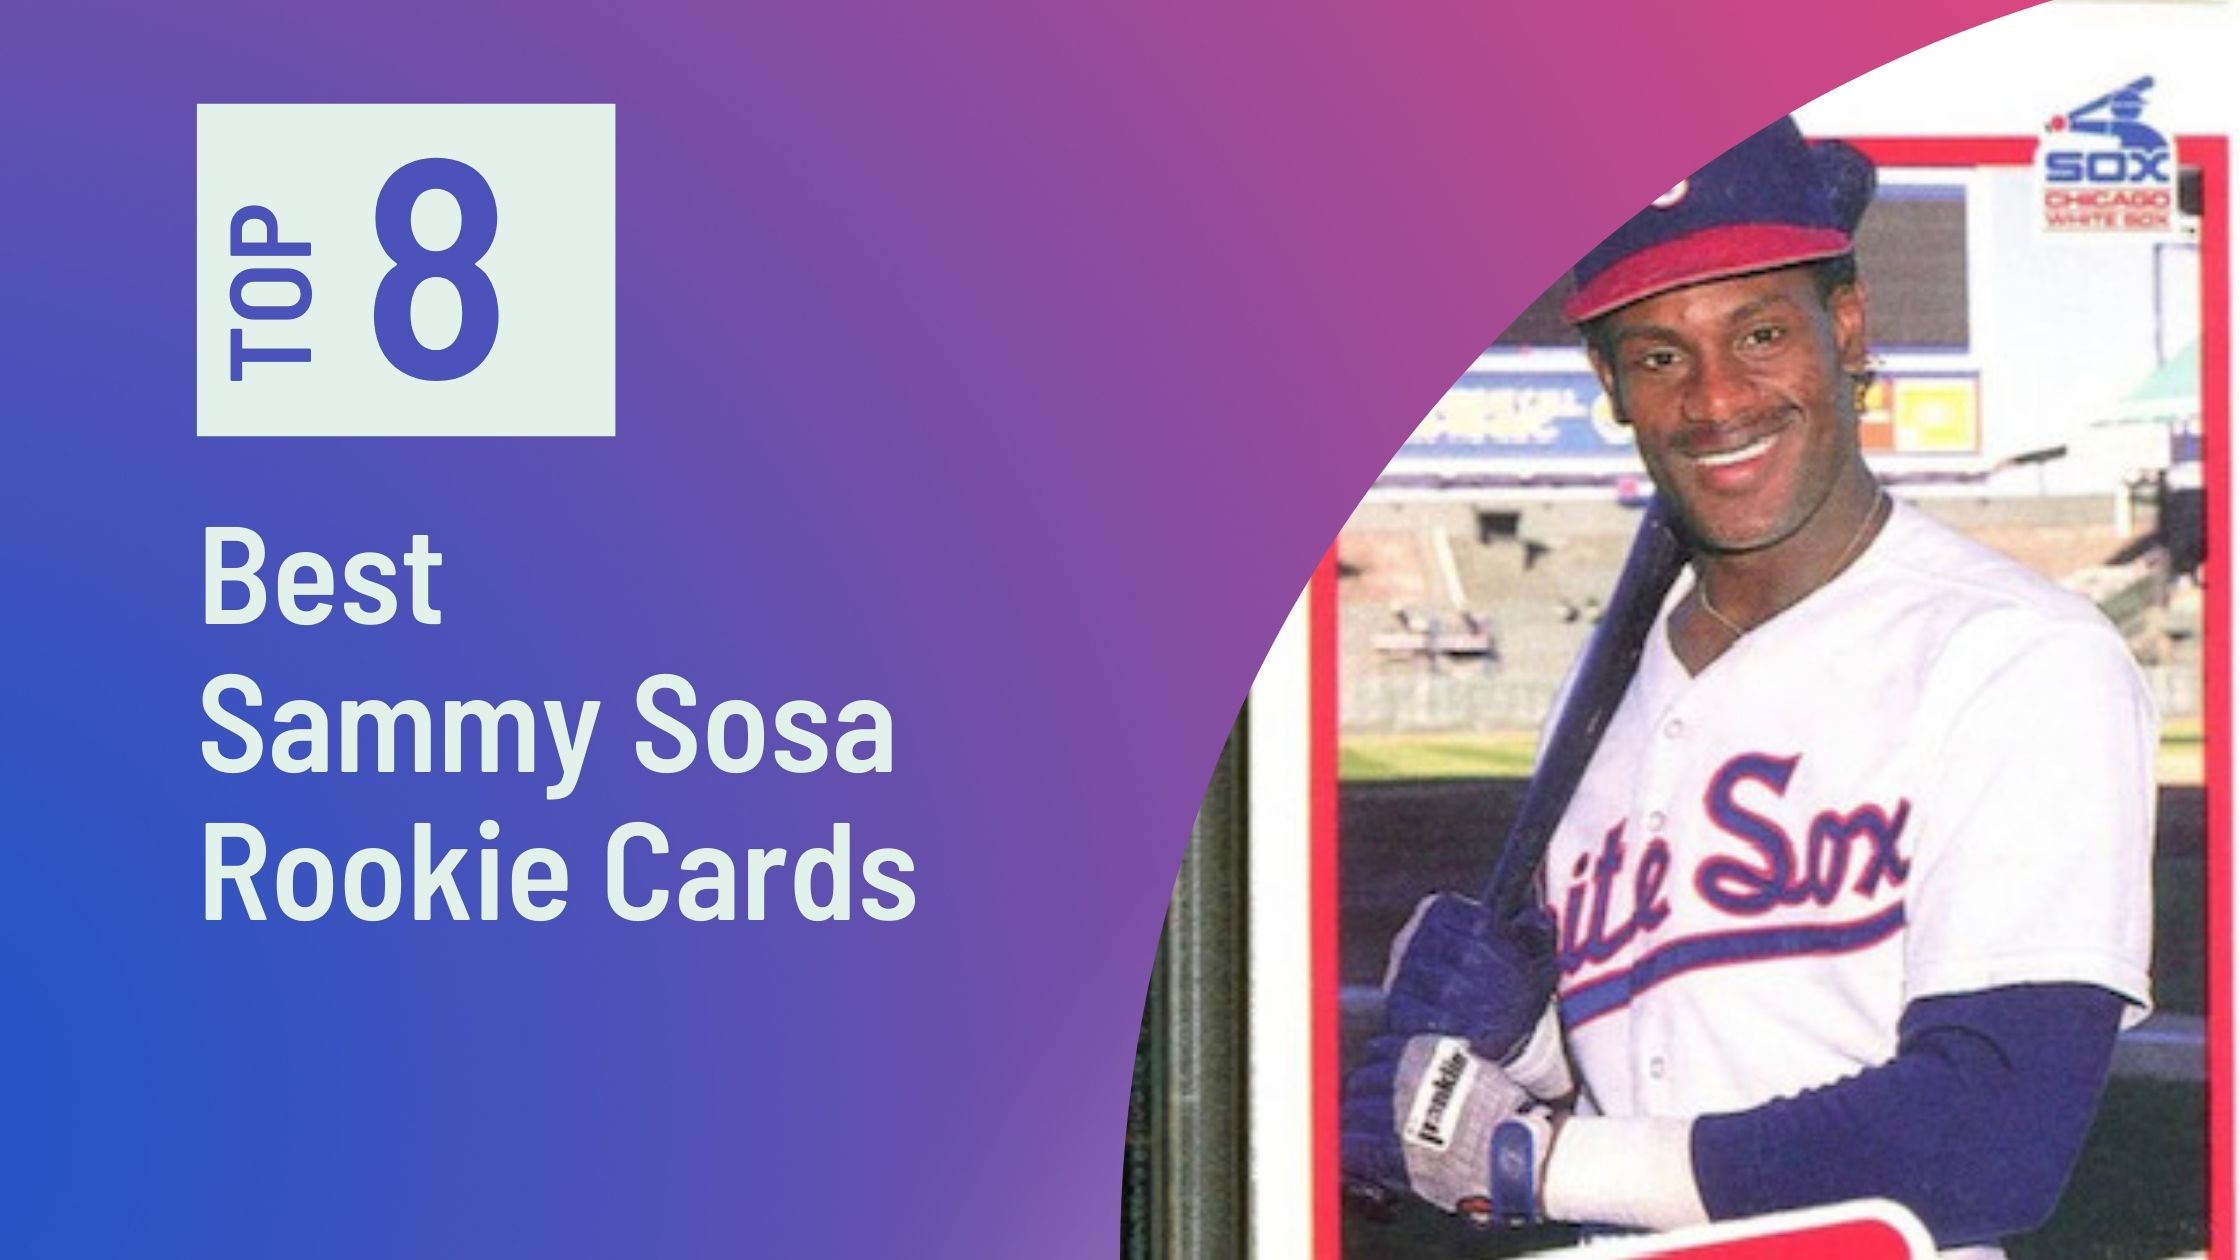 Featured image for the Best Sammy Sosa Rookie Cards blog post on Sports Cards Sharks